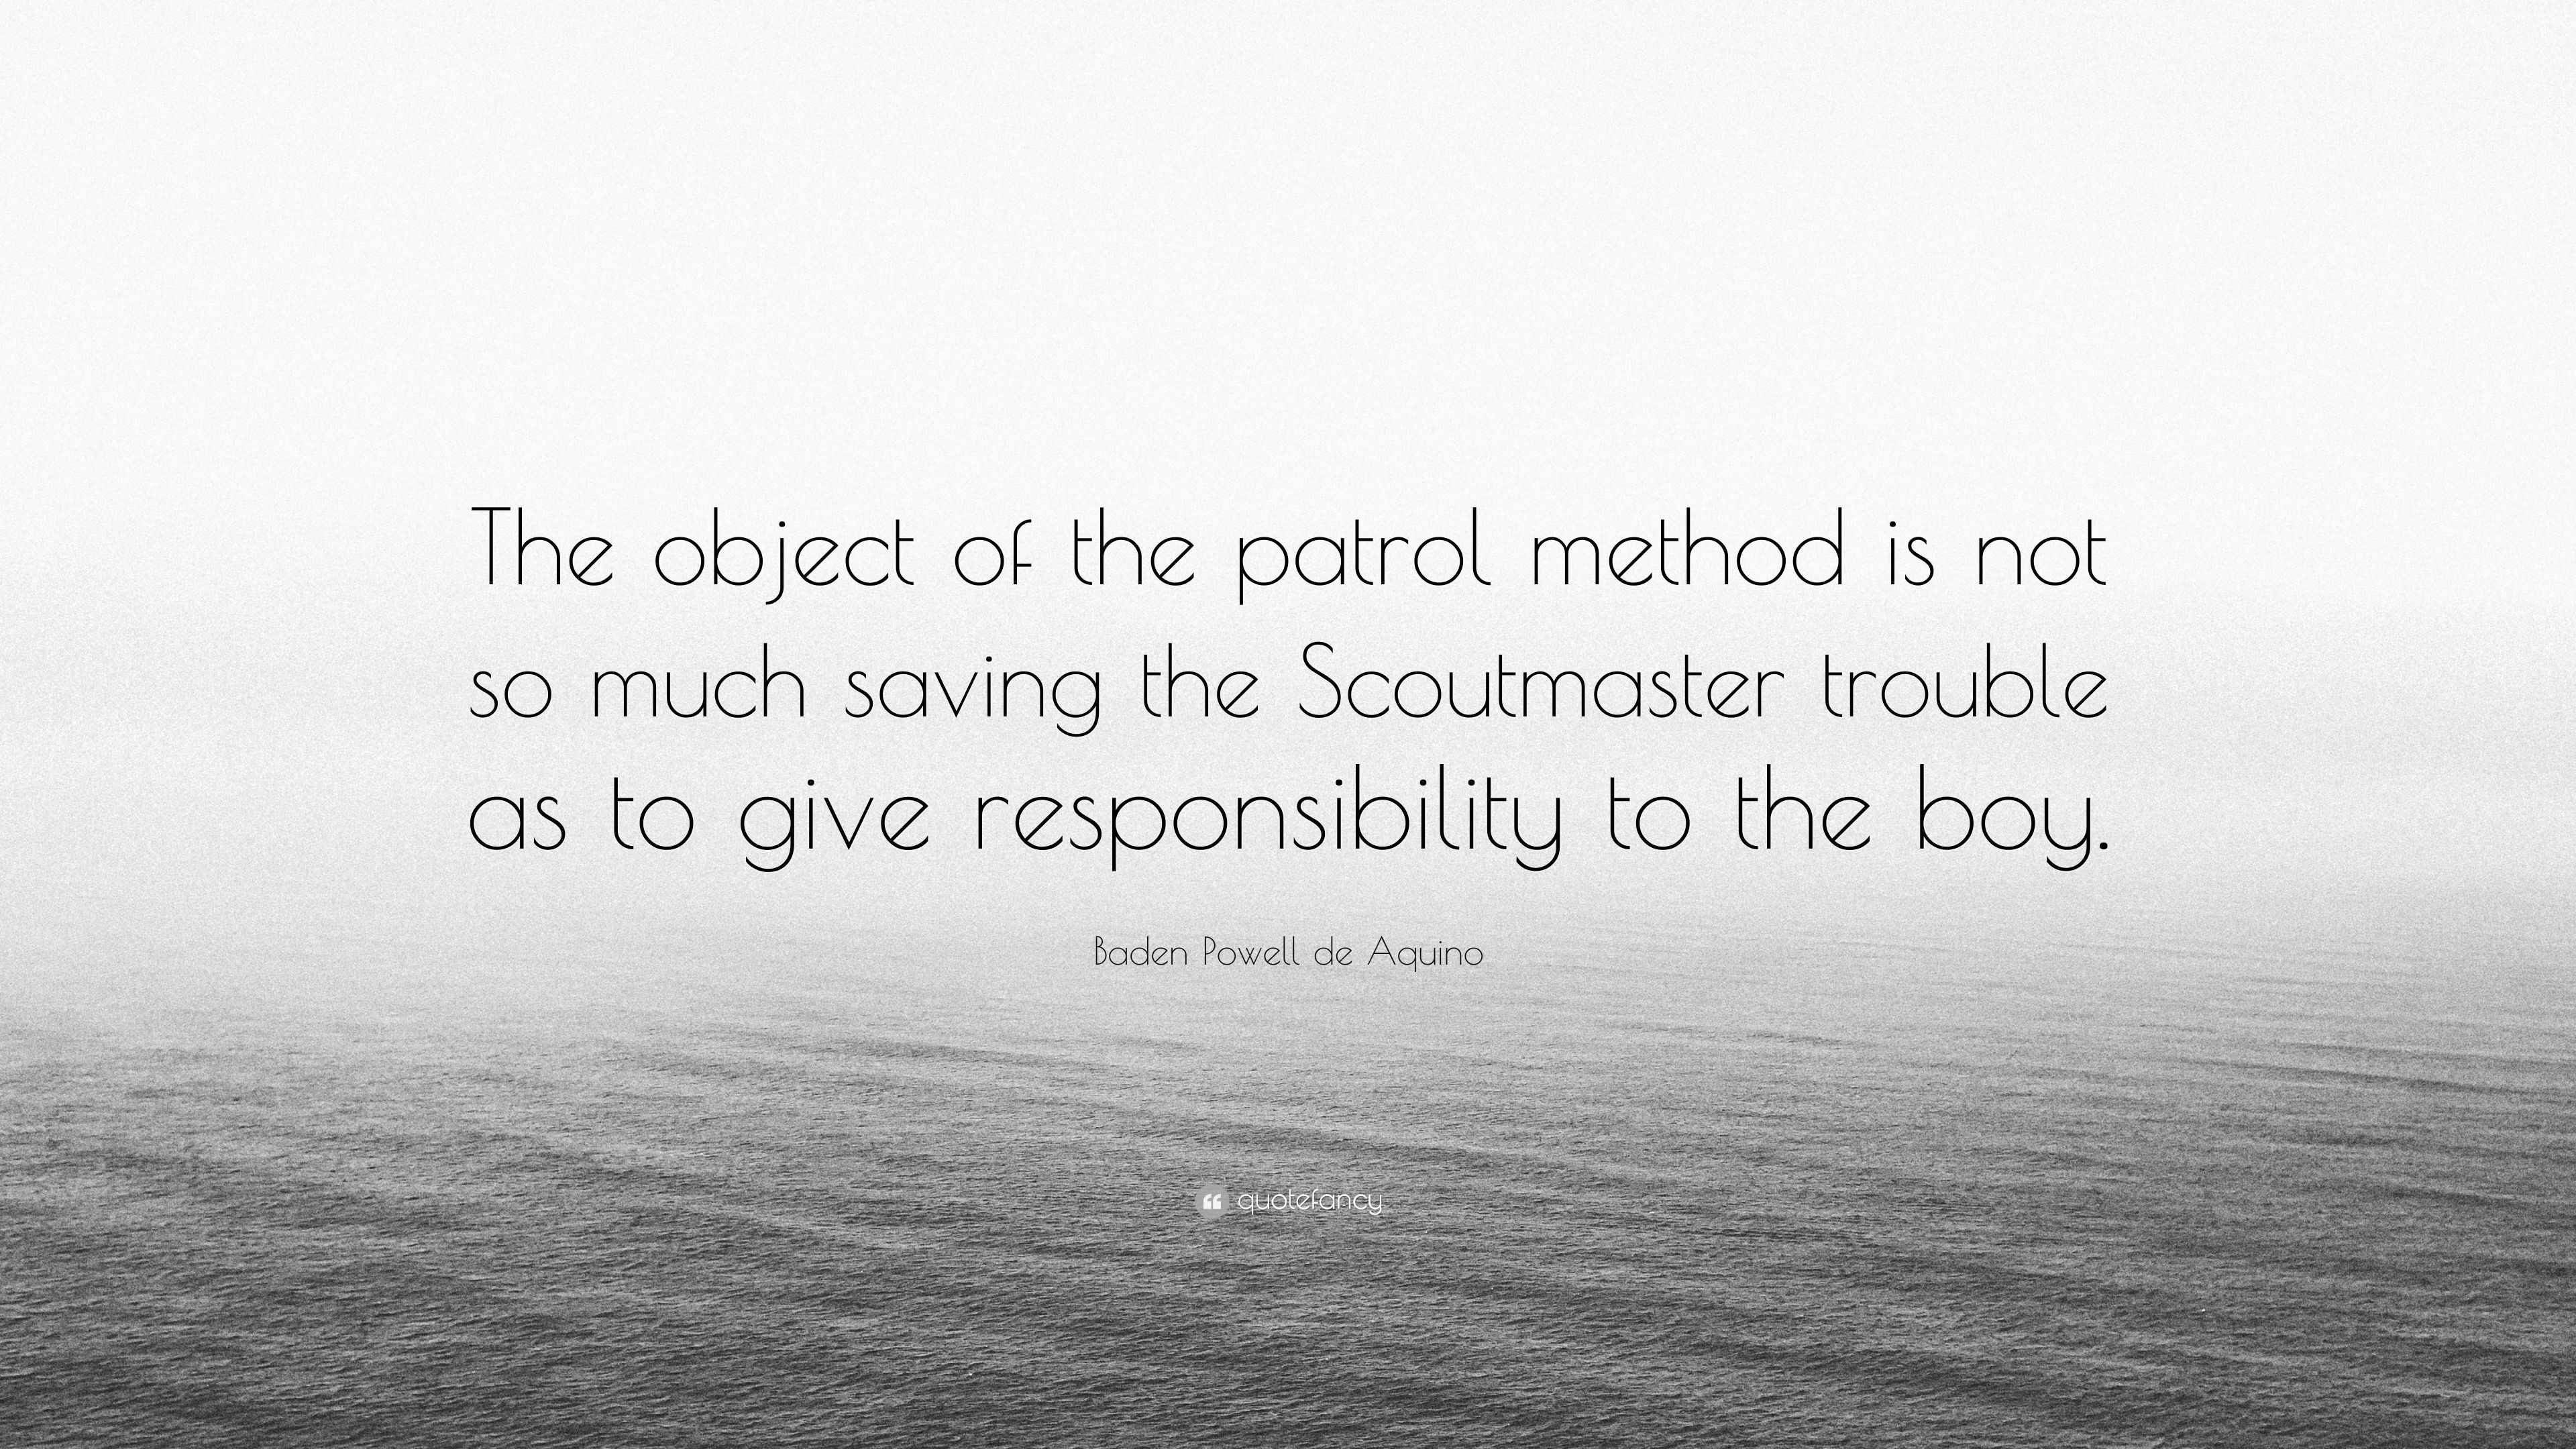 Baden Powell De Aquino Quote: “The Object Of The Patrol Method Is Not So Much Saving